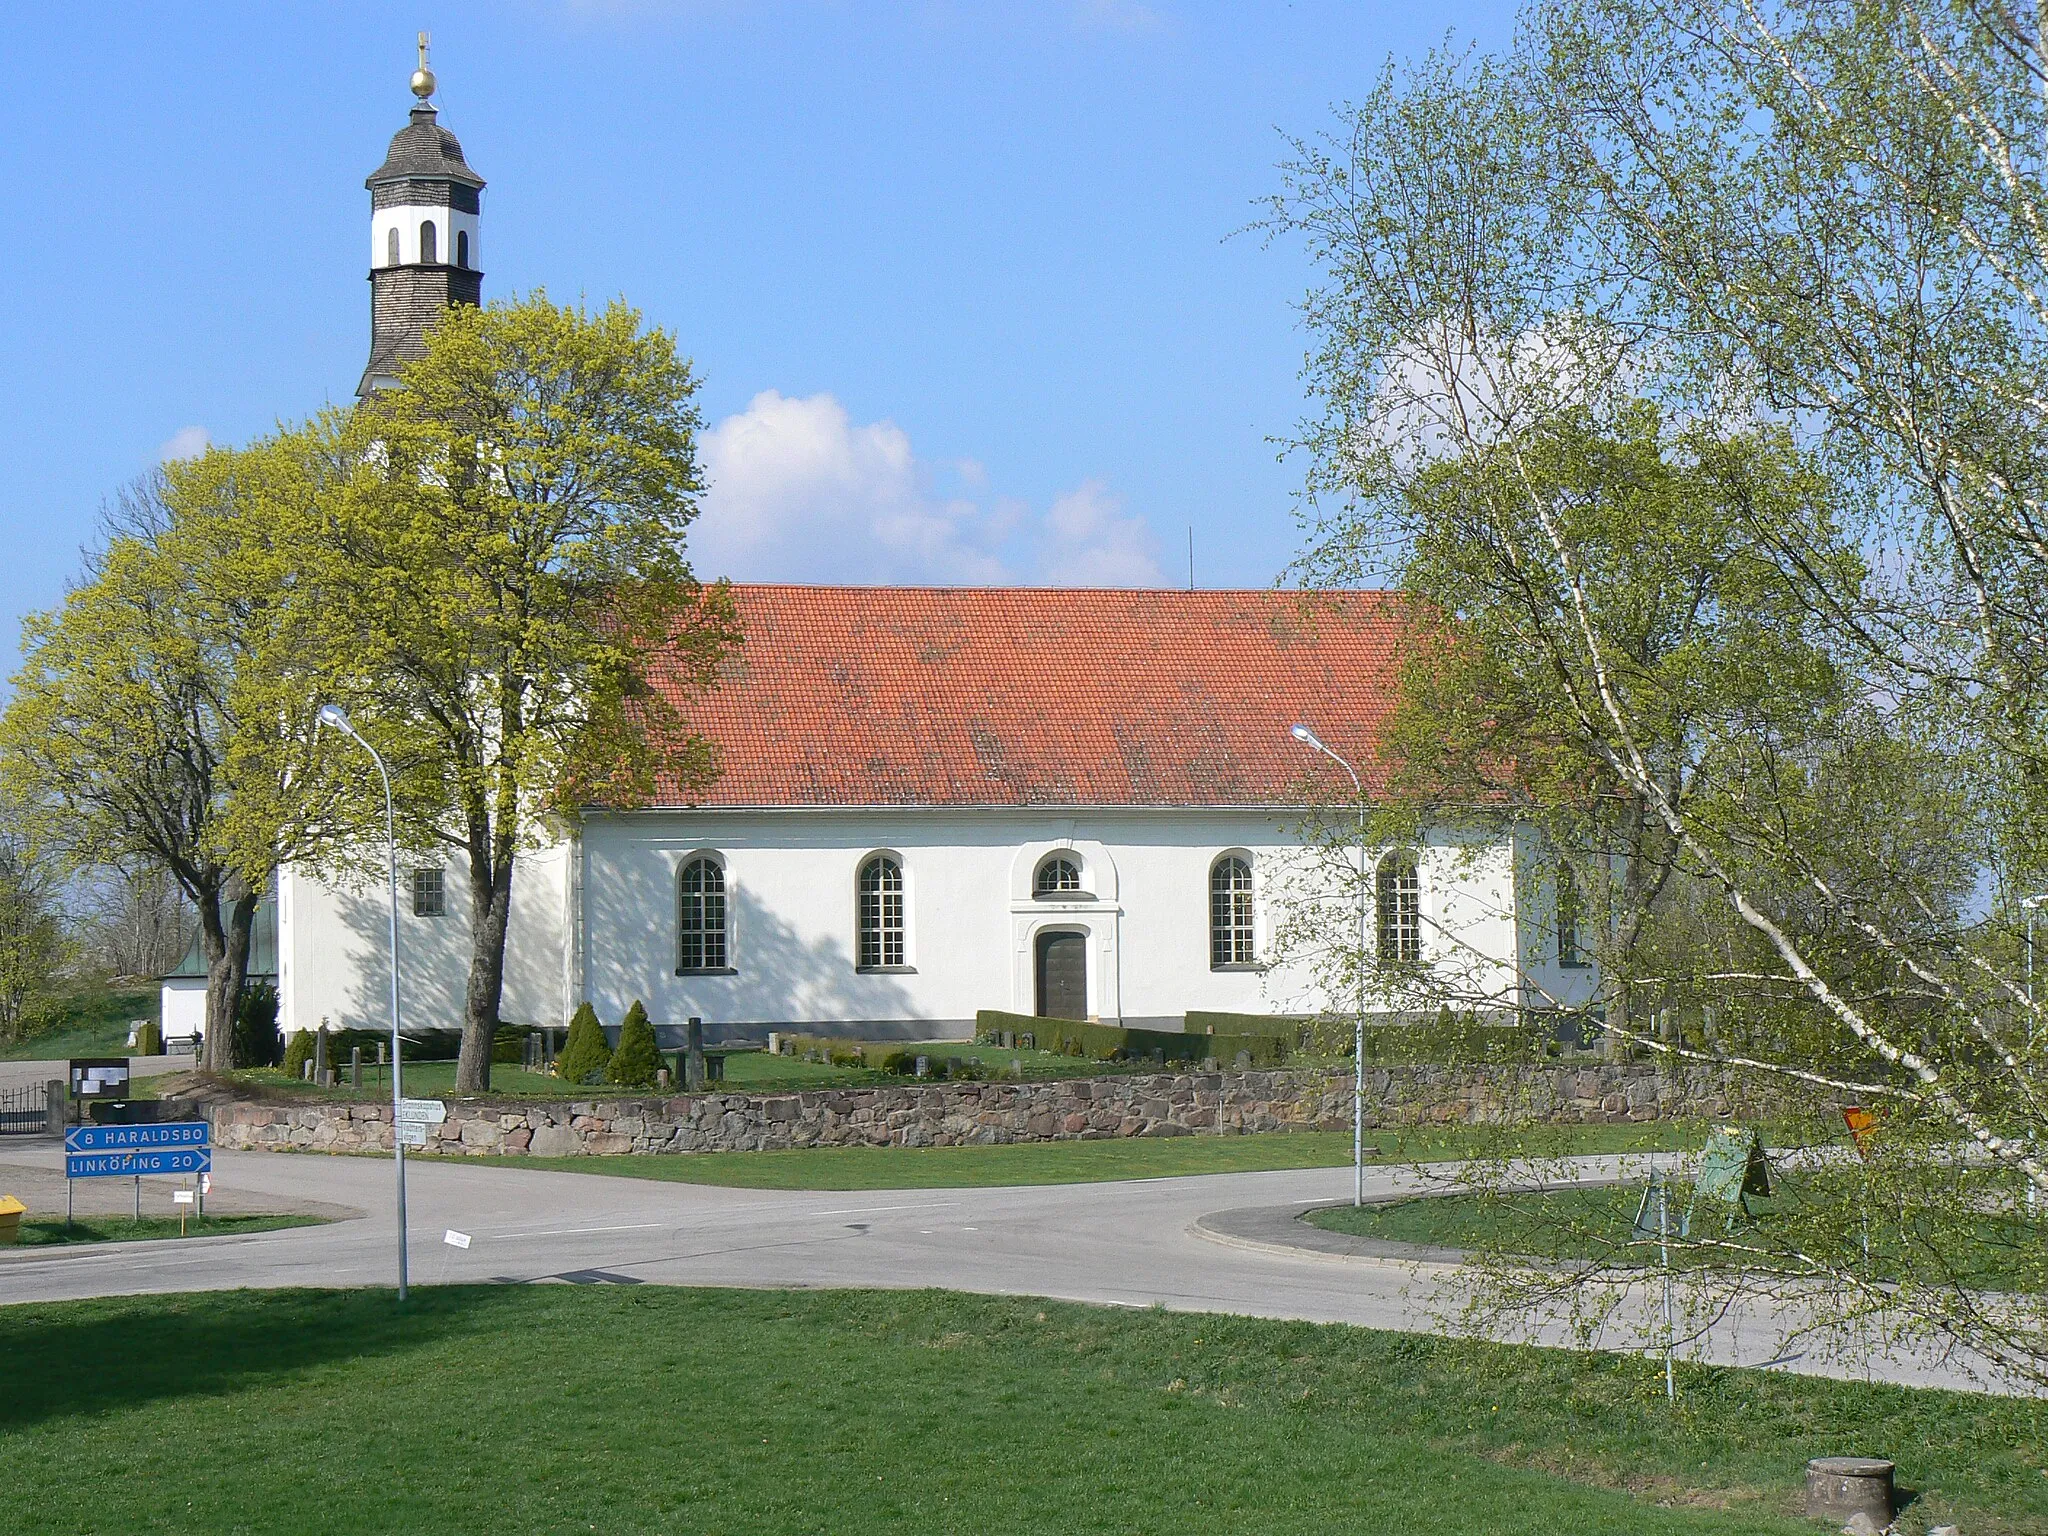 Photo showing: Nykil church, Church of Sweden in Diocese of Linköping